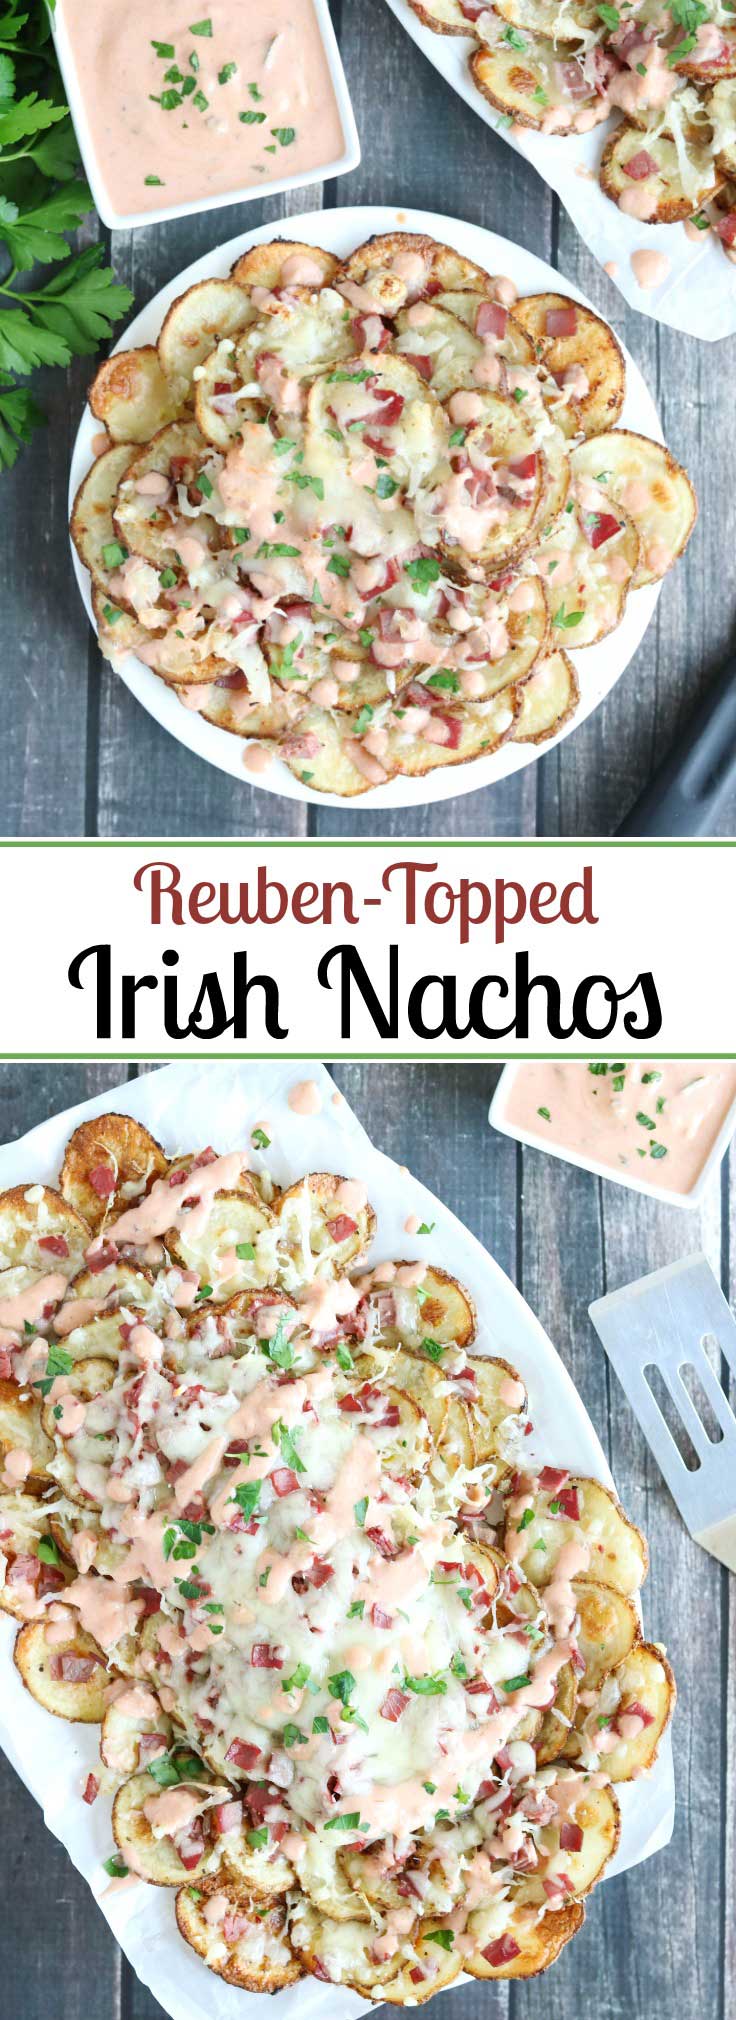 Seasoned, oven-baked potato chips and classic reuben toppings! These Reuben-Topped Irish Nachos feature all the ever-popular flavors of a reuben sandwich, in an easy "nacho" recipe! Easy to make, seriously delicious! A perfect St. Patrick's Day recipe, and also a great game day snack recipe ... or for snacks and appetizers ANY day! Bonus: this Irish Nacho recipe is so much healthier, too! You'll be surprised! | www.TwoHealthyKitchens.com